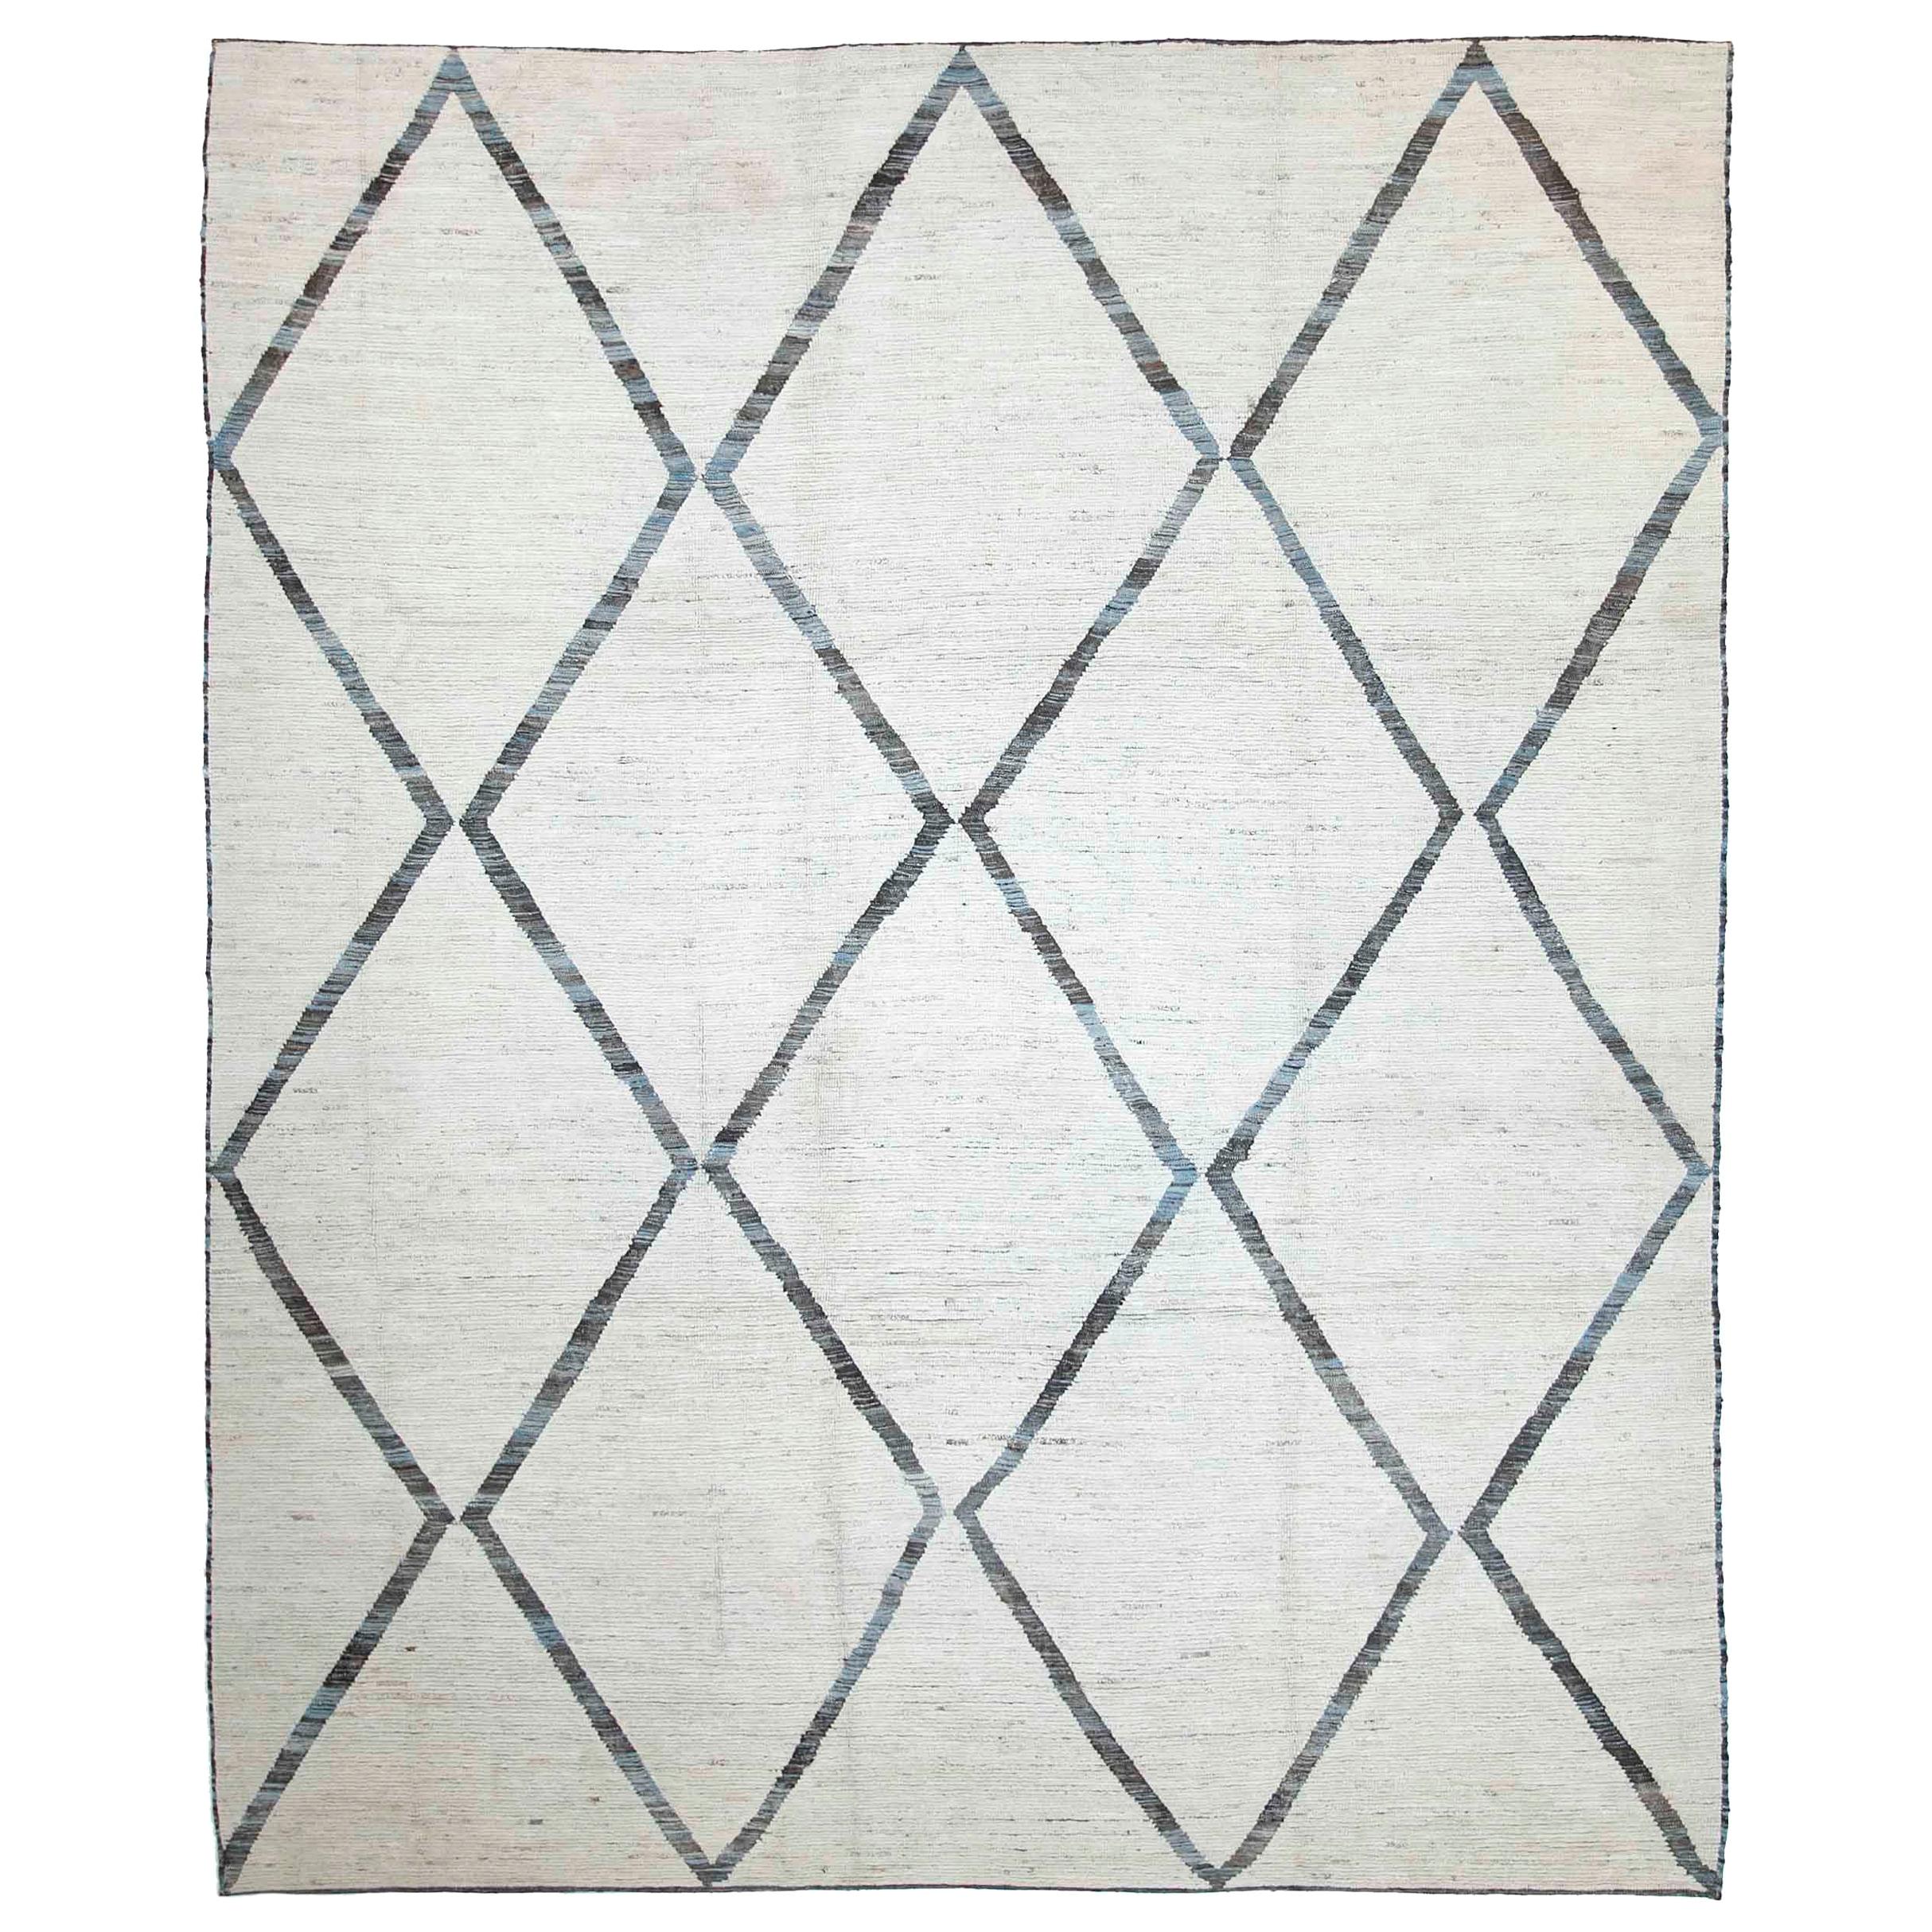 Modern Afghan Moroccan Style Rug with Brown and Blue Tribal Diamonds